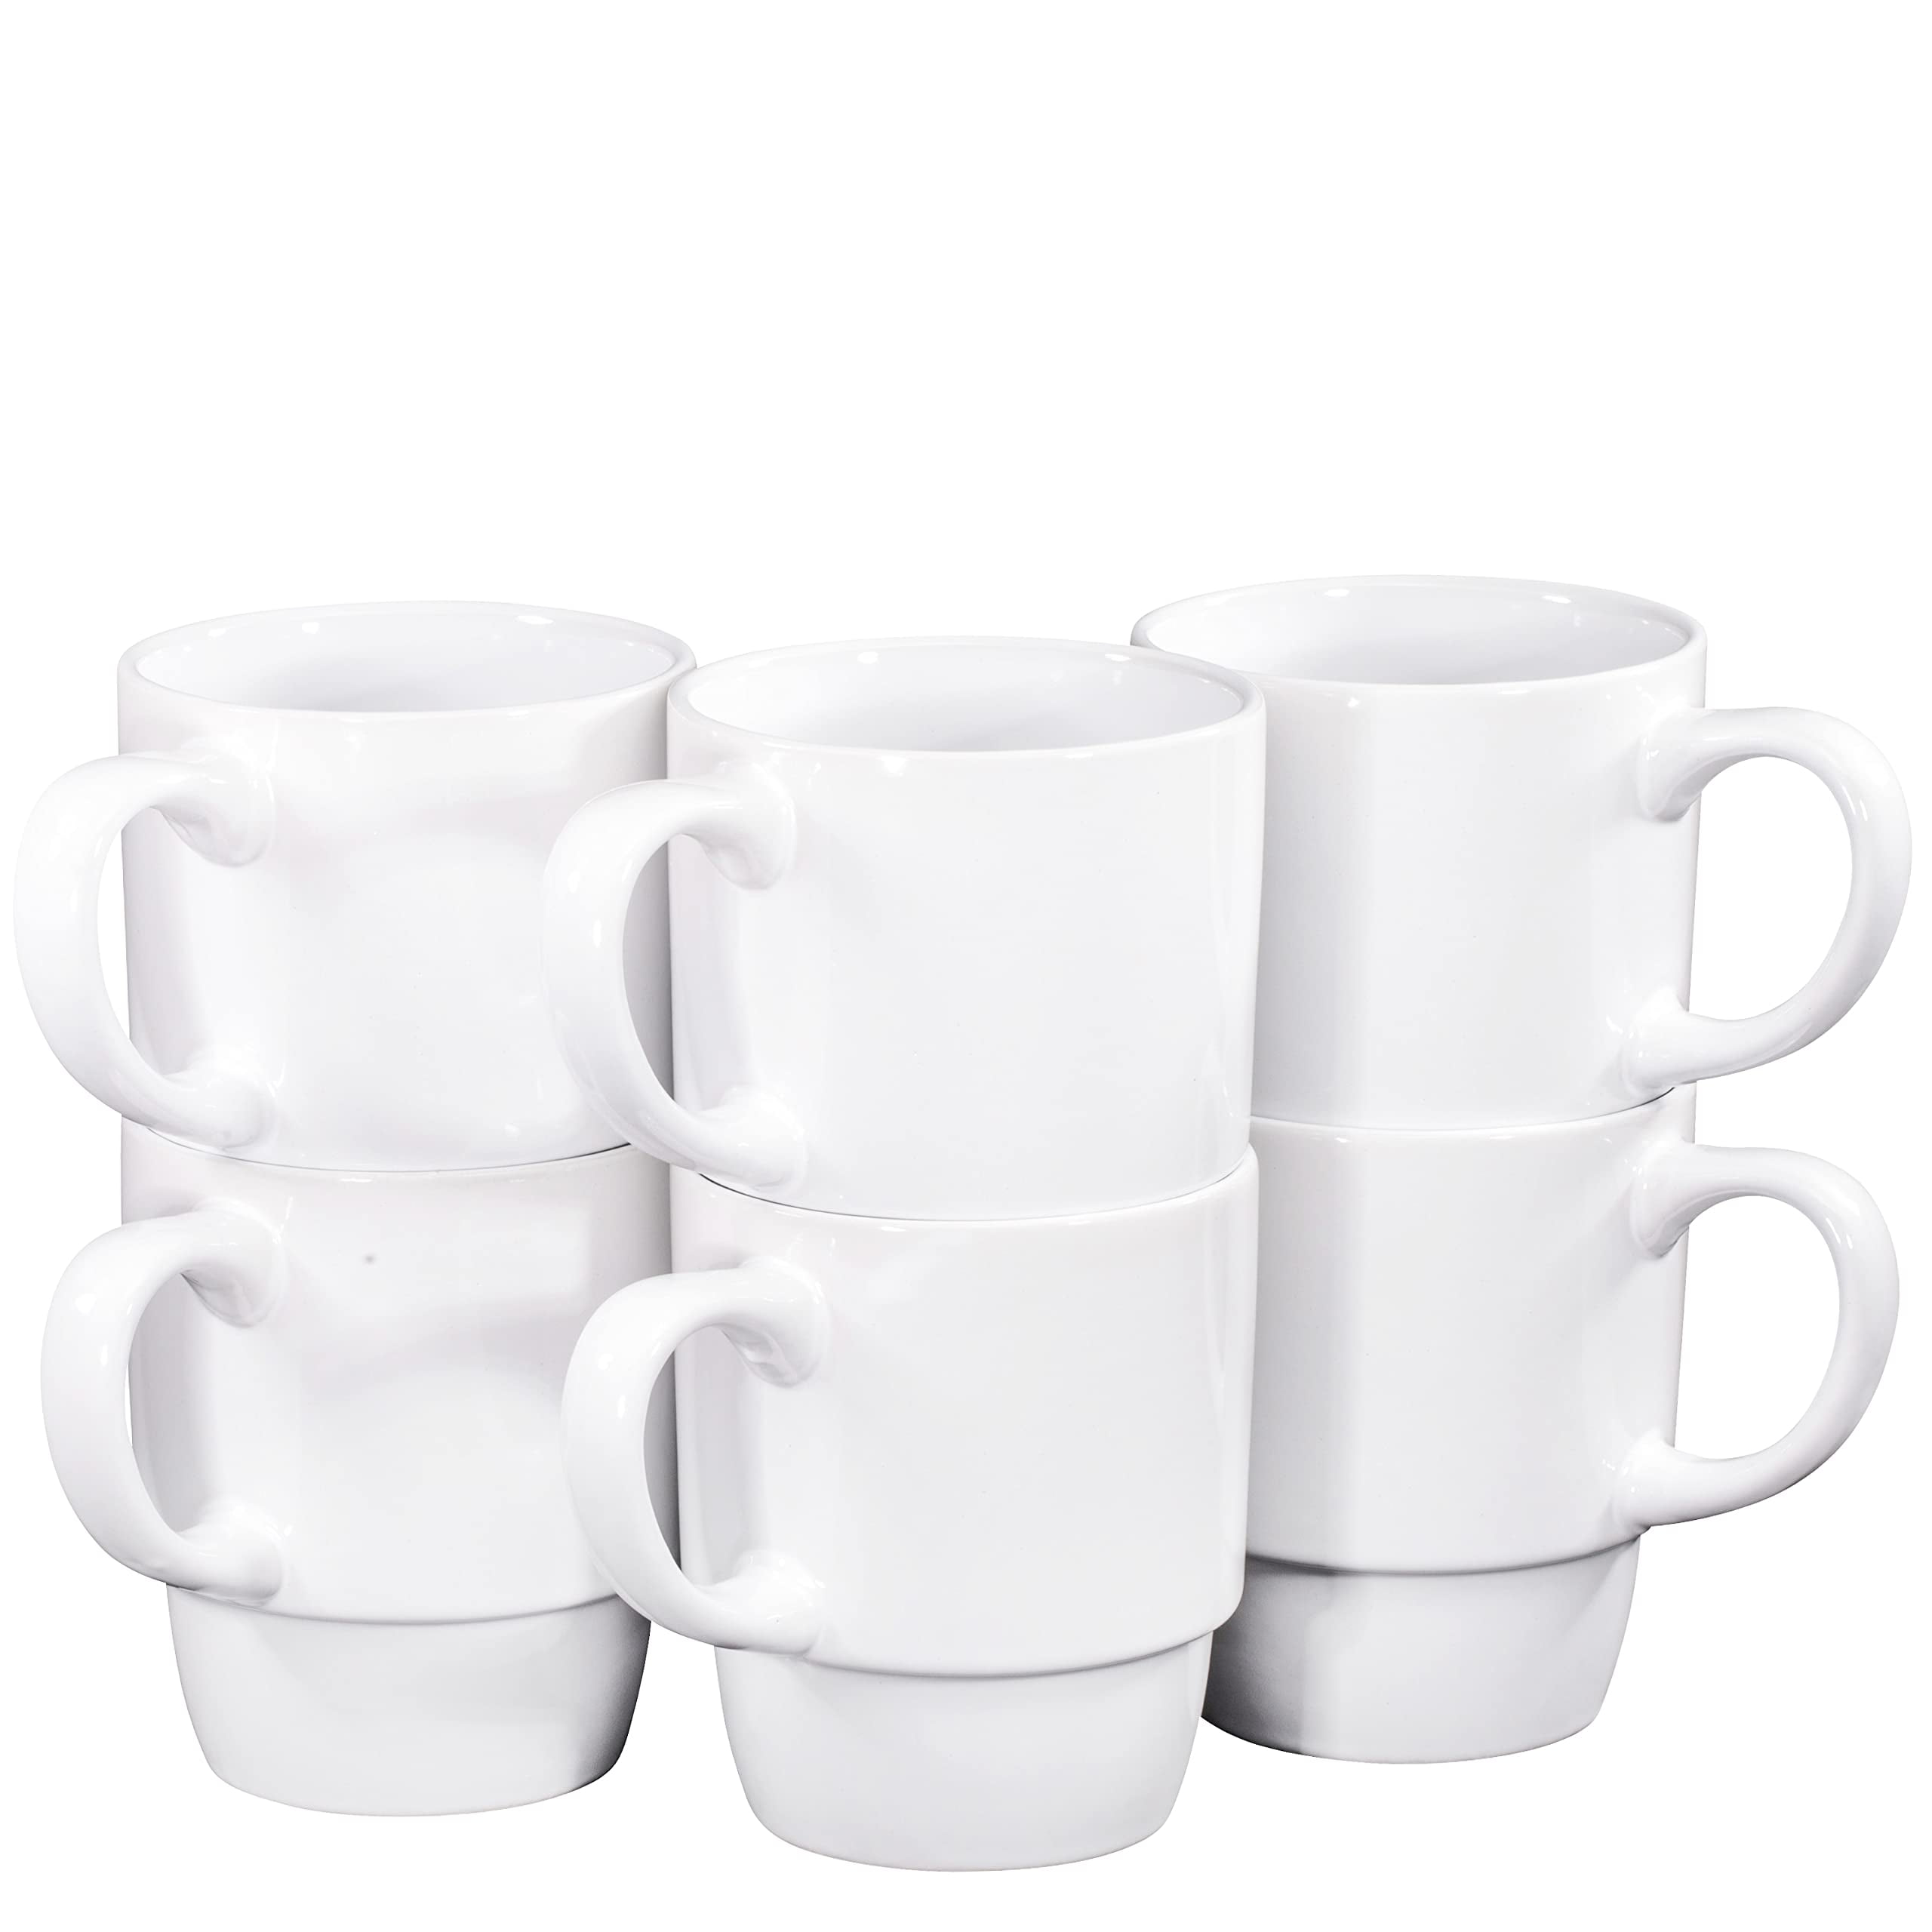 Sweese 10 Oz Stackable White Coffee Mug, Porcelain Coffee Mugs Sets of 6,  Coffee Cups with Handle fo…See more Sweese 10 Oz Stackable White Coffee  Mug